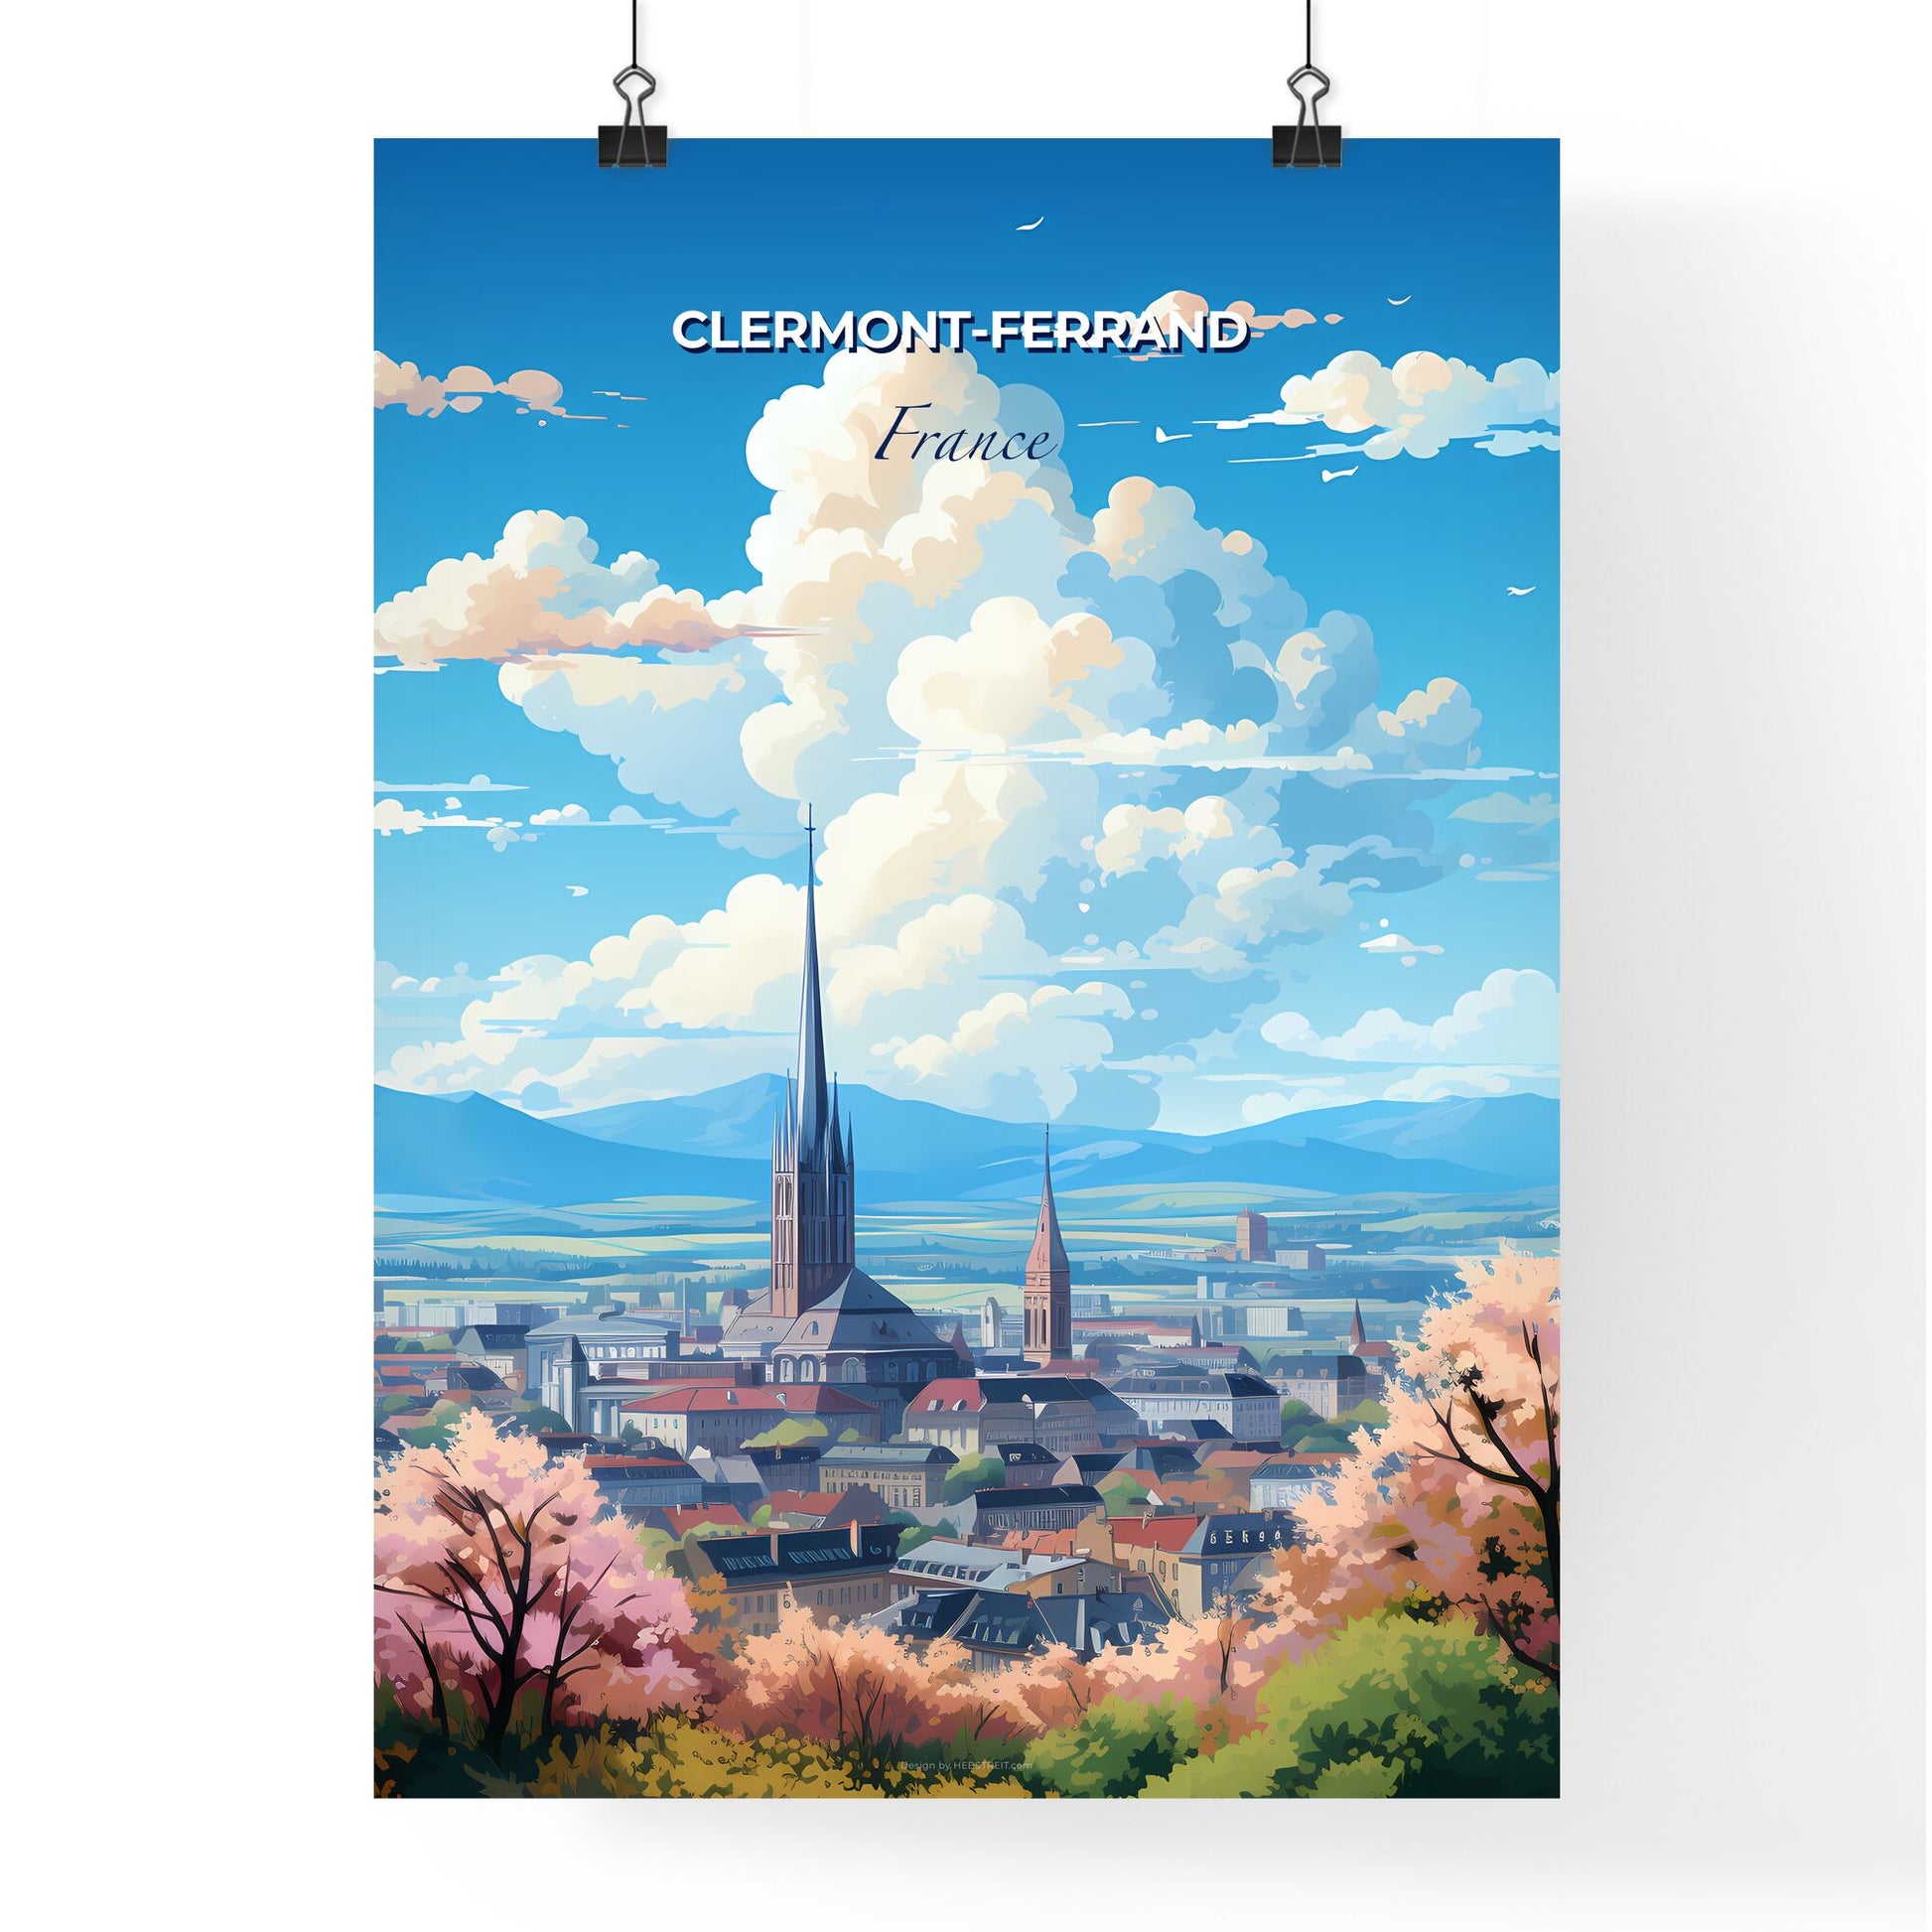 Clermont-Ferrand France Skyline - A City With A Tall Spire And Trees And Mountains In The Background - Customizable Travel Gift Default Title